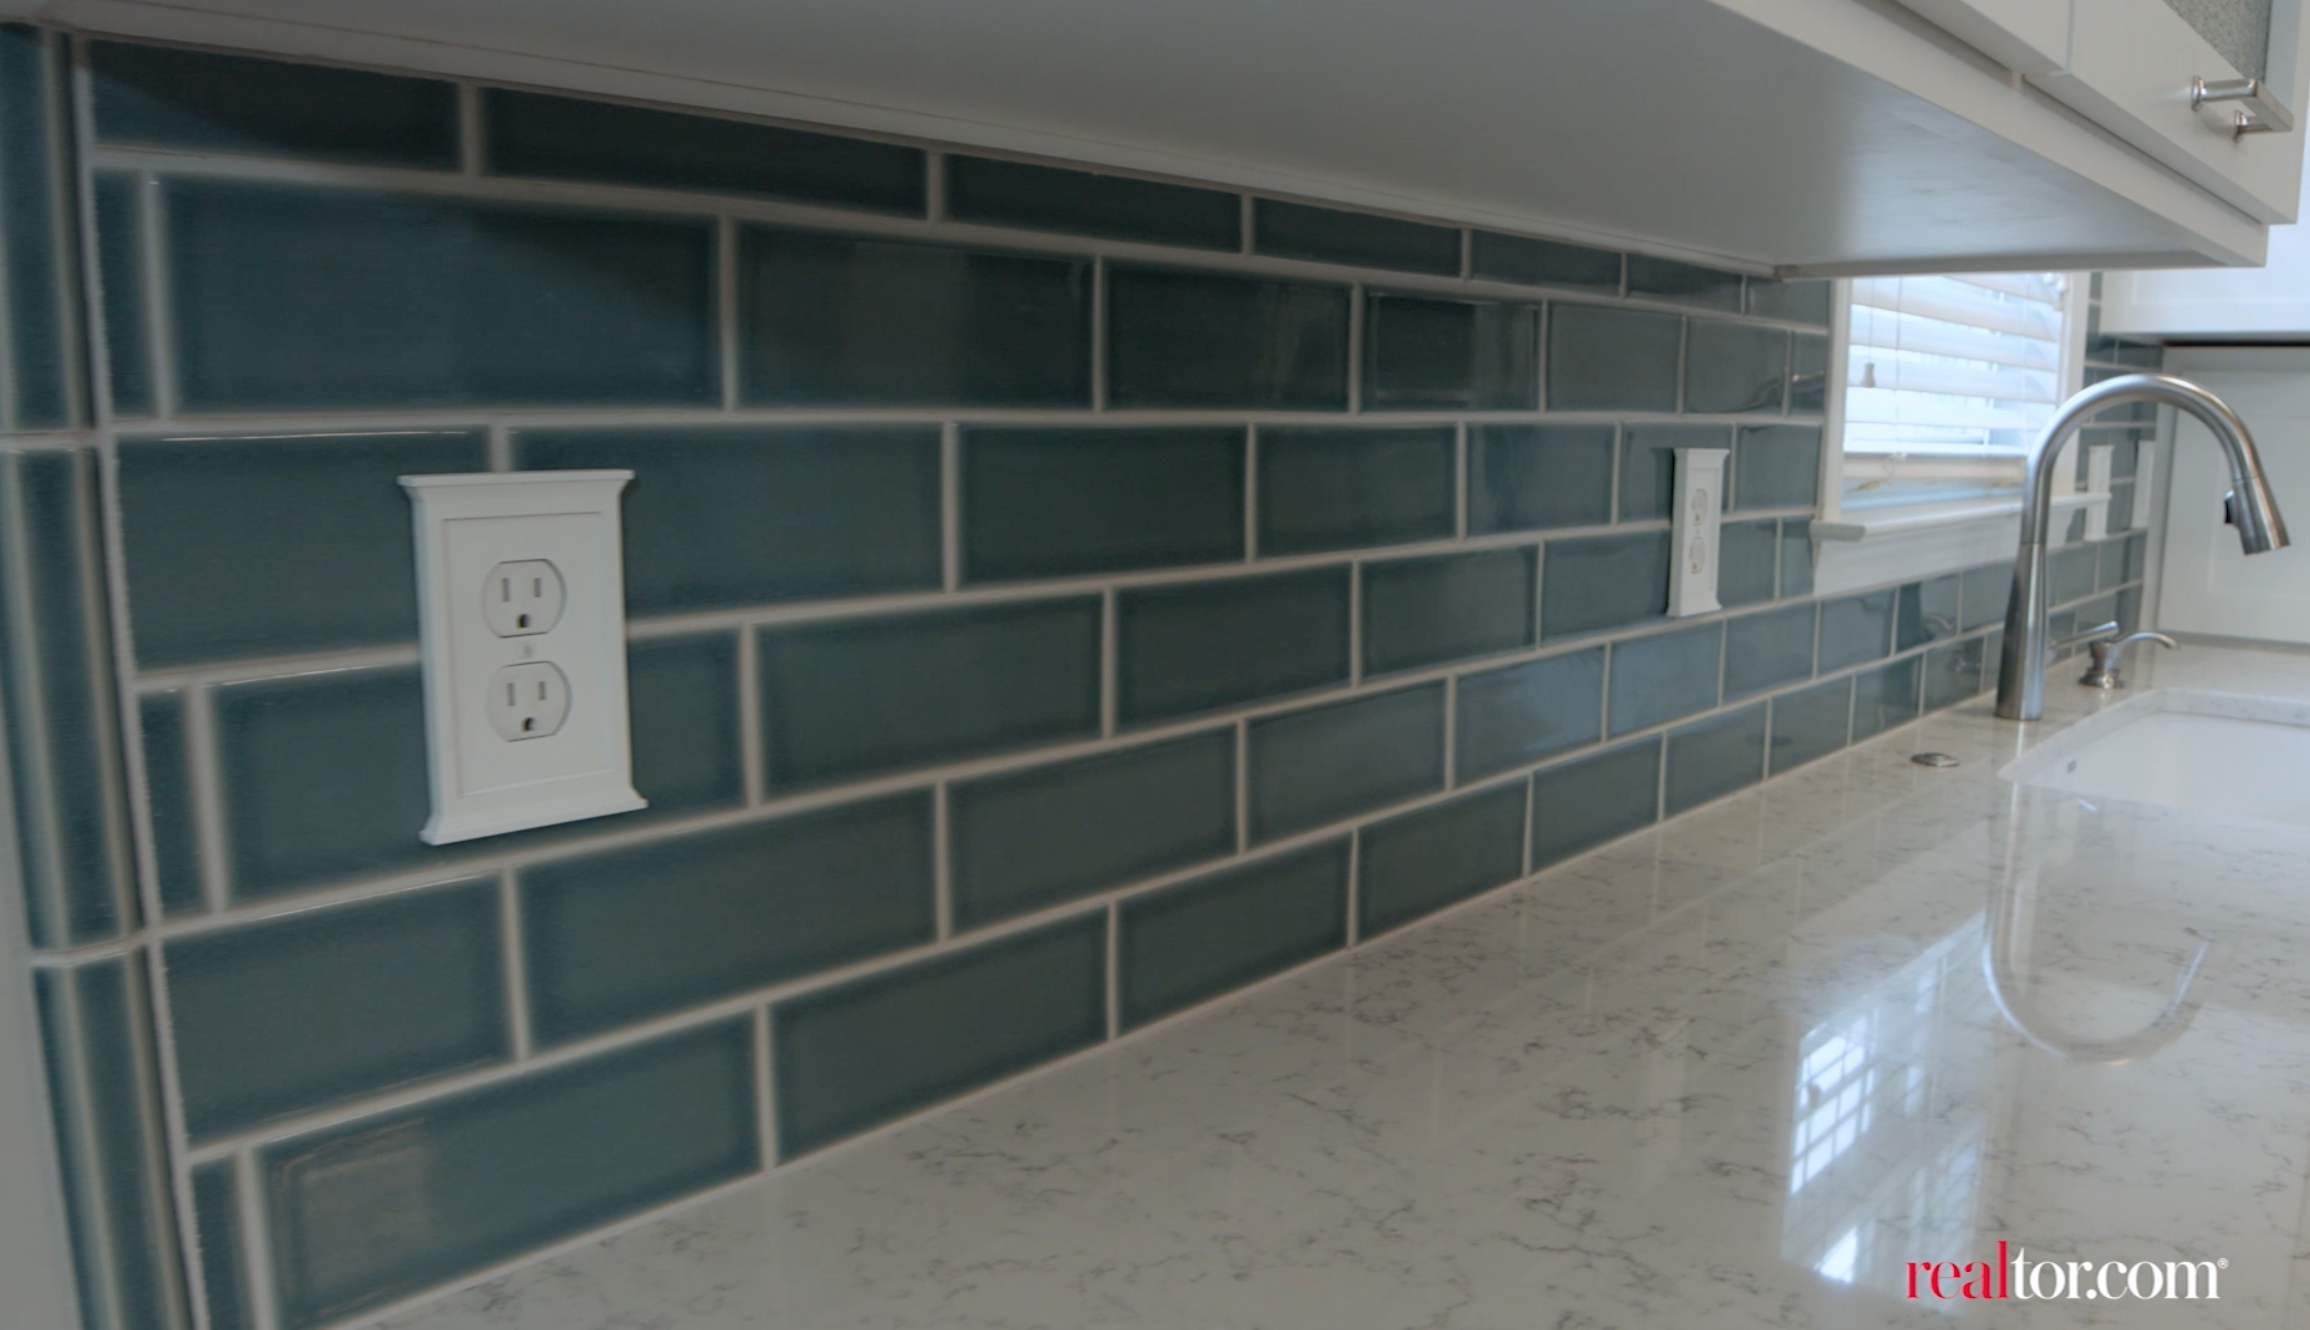 This teal backsplash provides a necessary pop of color. 